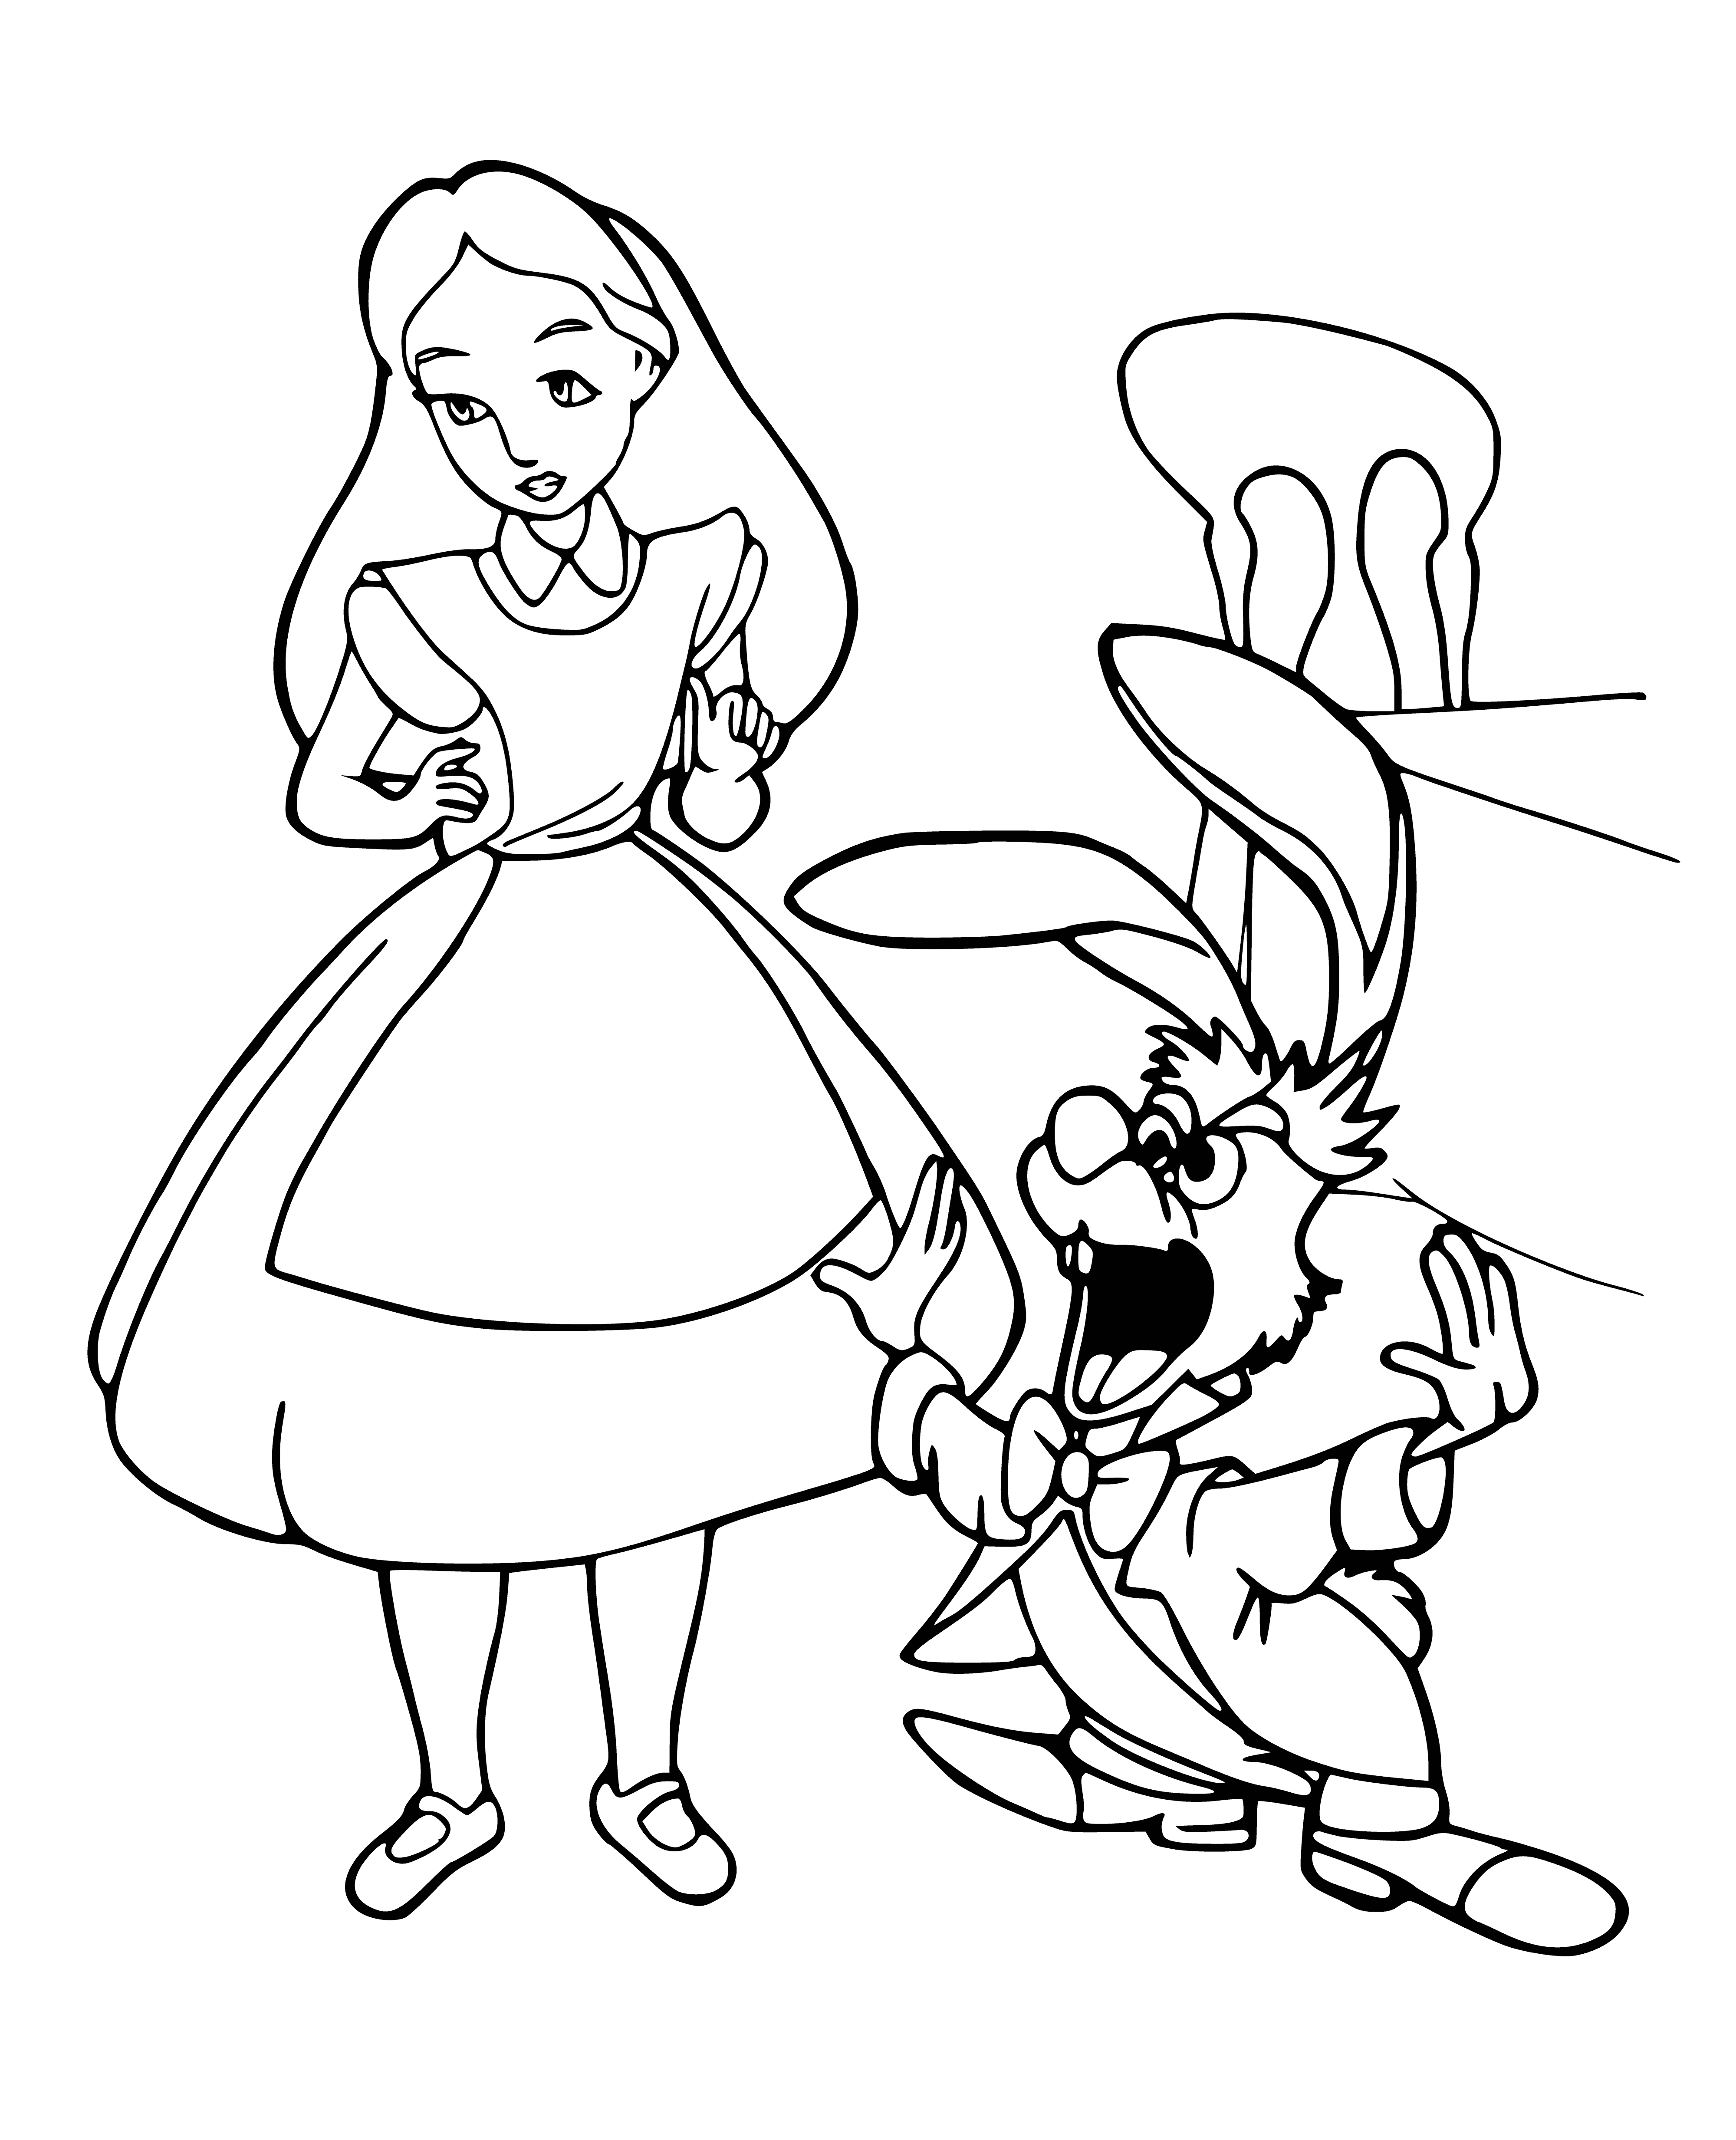 coloring page: Alice & March Hare drinking tea & eating cake; both look serious. #AliceInWonderland #coloringpage